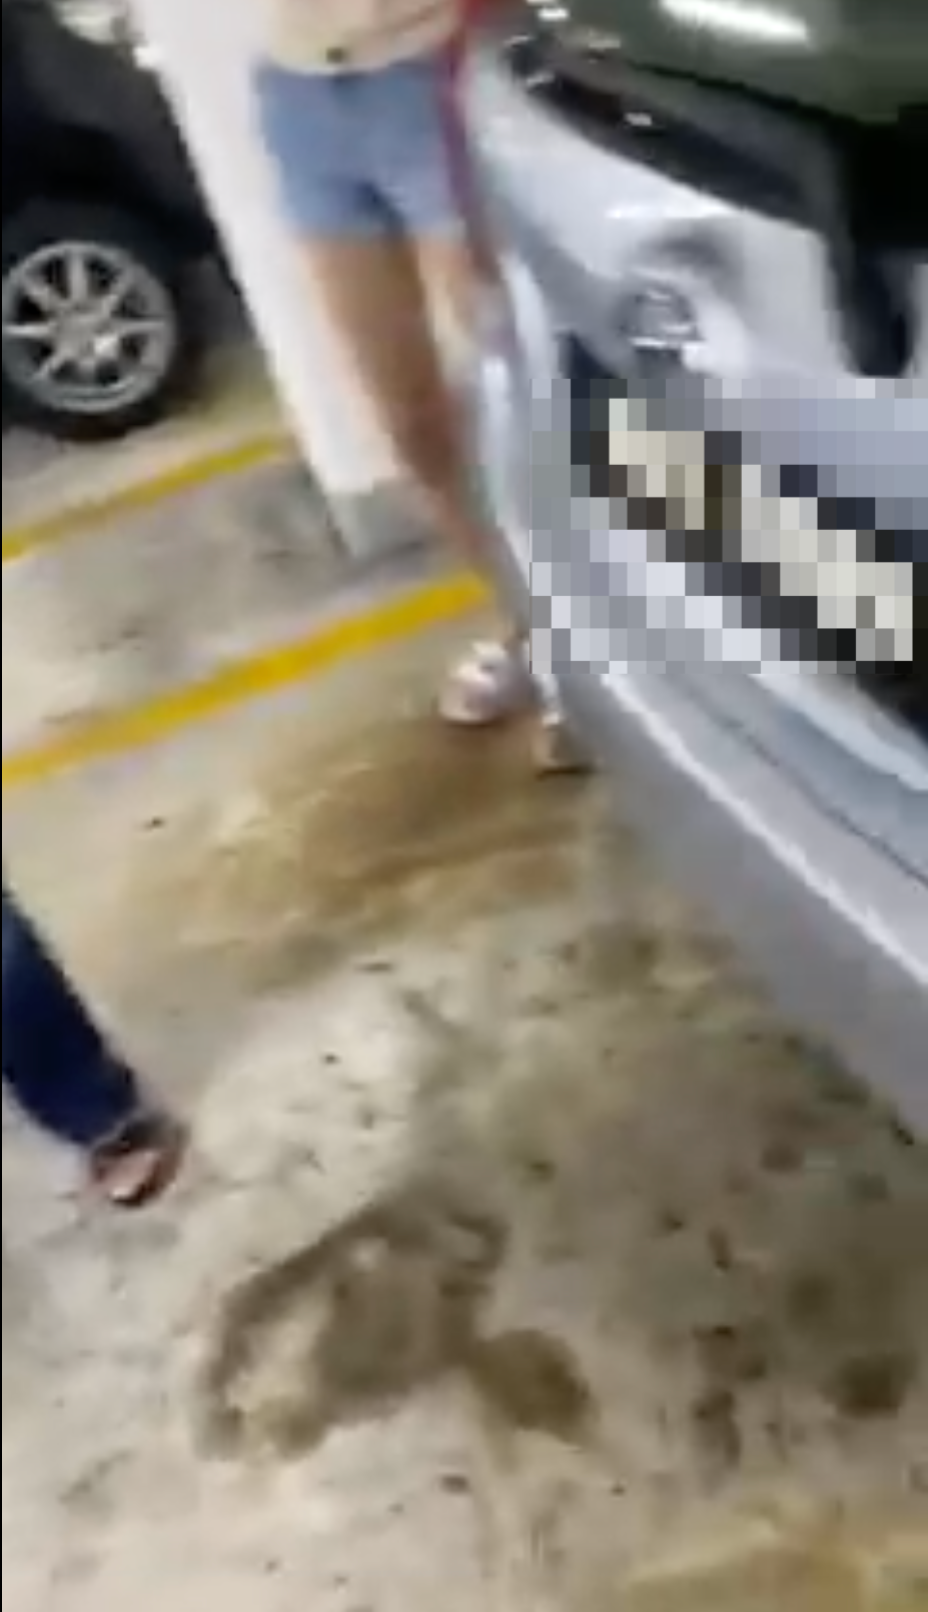 [video] 'parking' her baby stroller in spot while waiting for husband to park their car